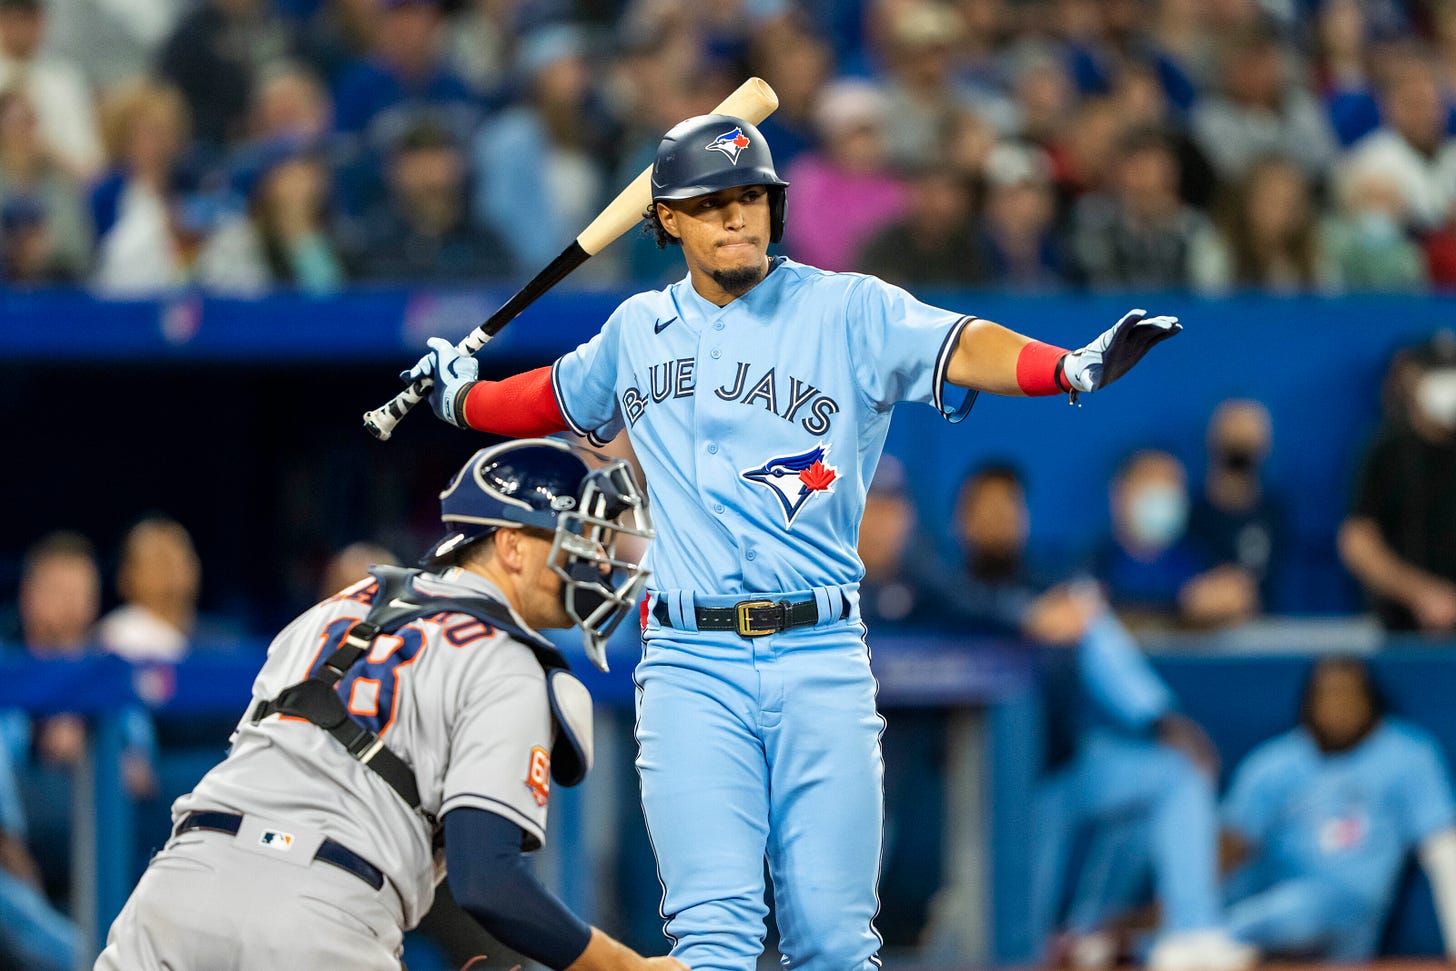 Blue Jays: Potential Lineup Change Involving Two Hitters